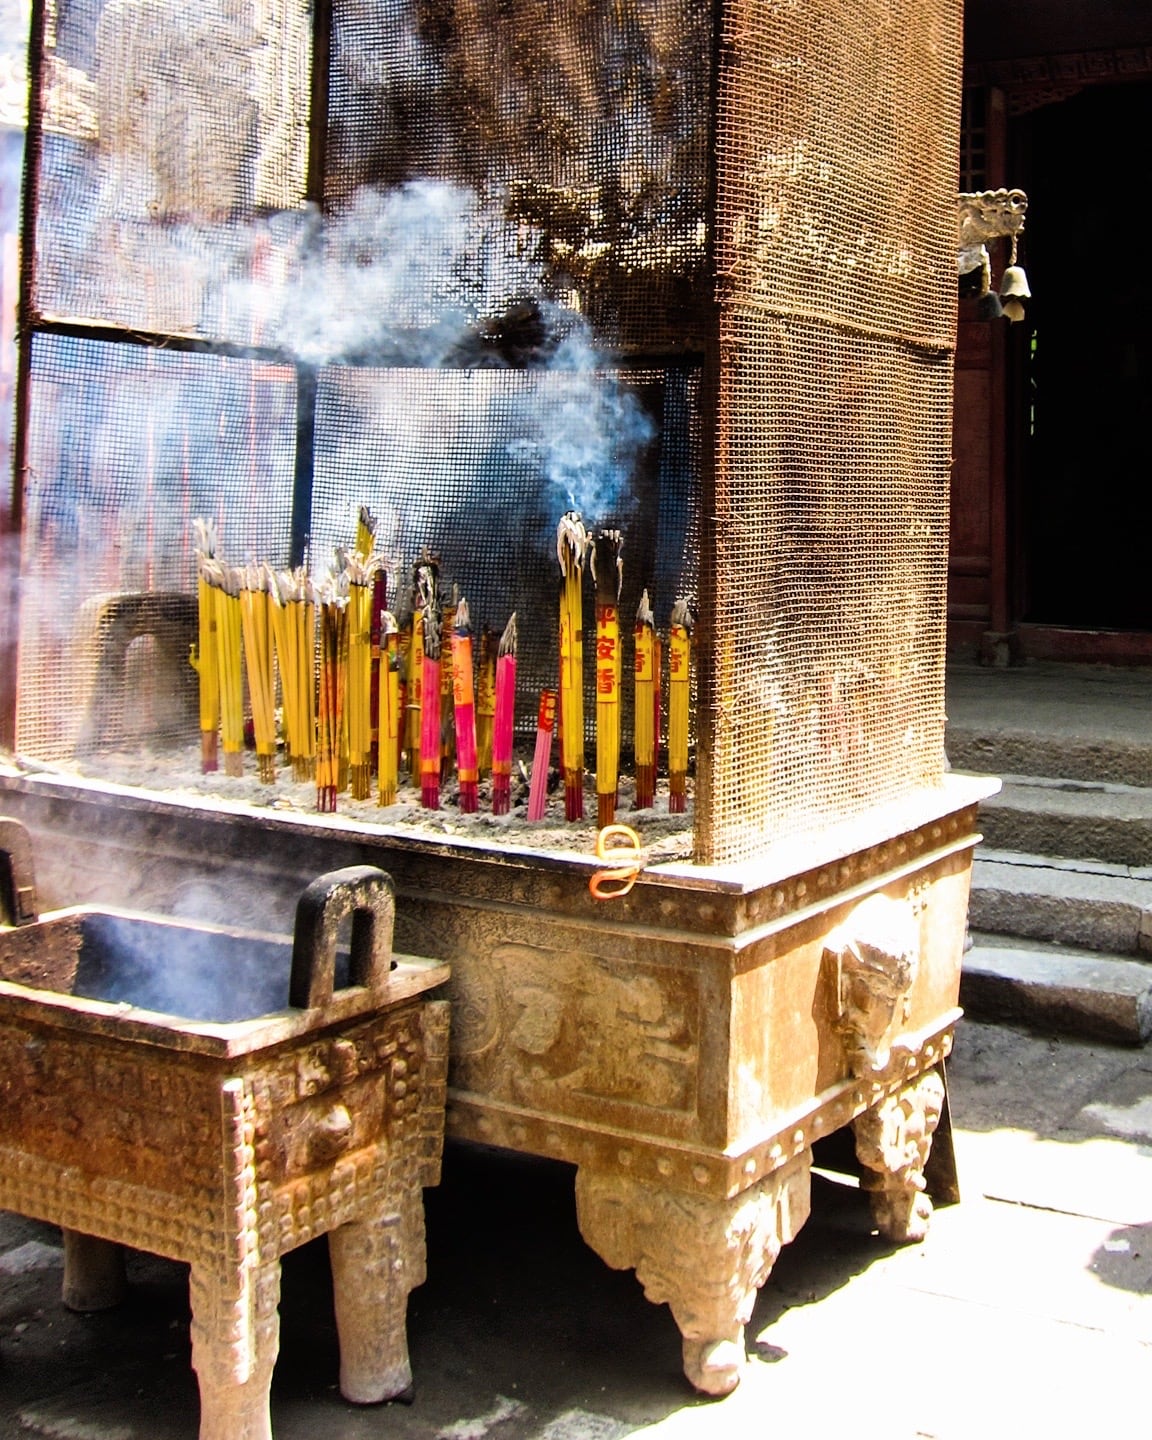 incense burning in a temple